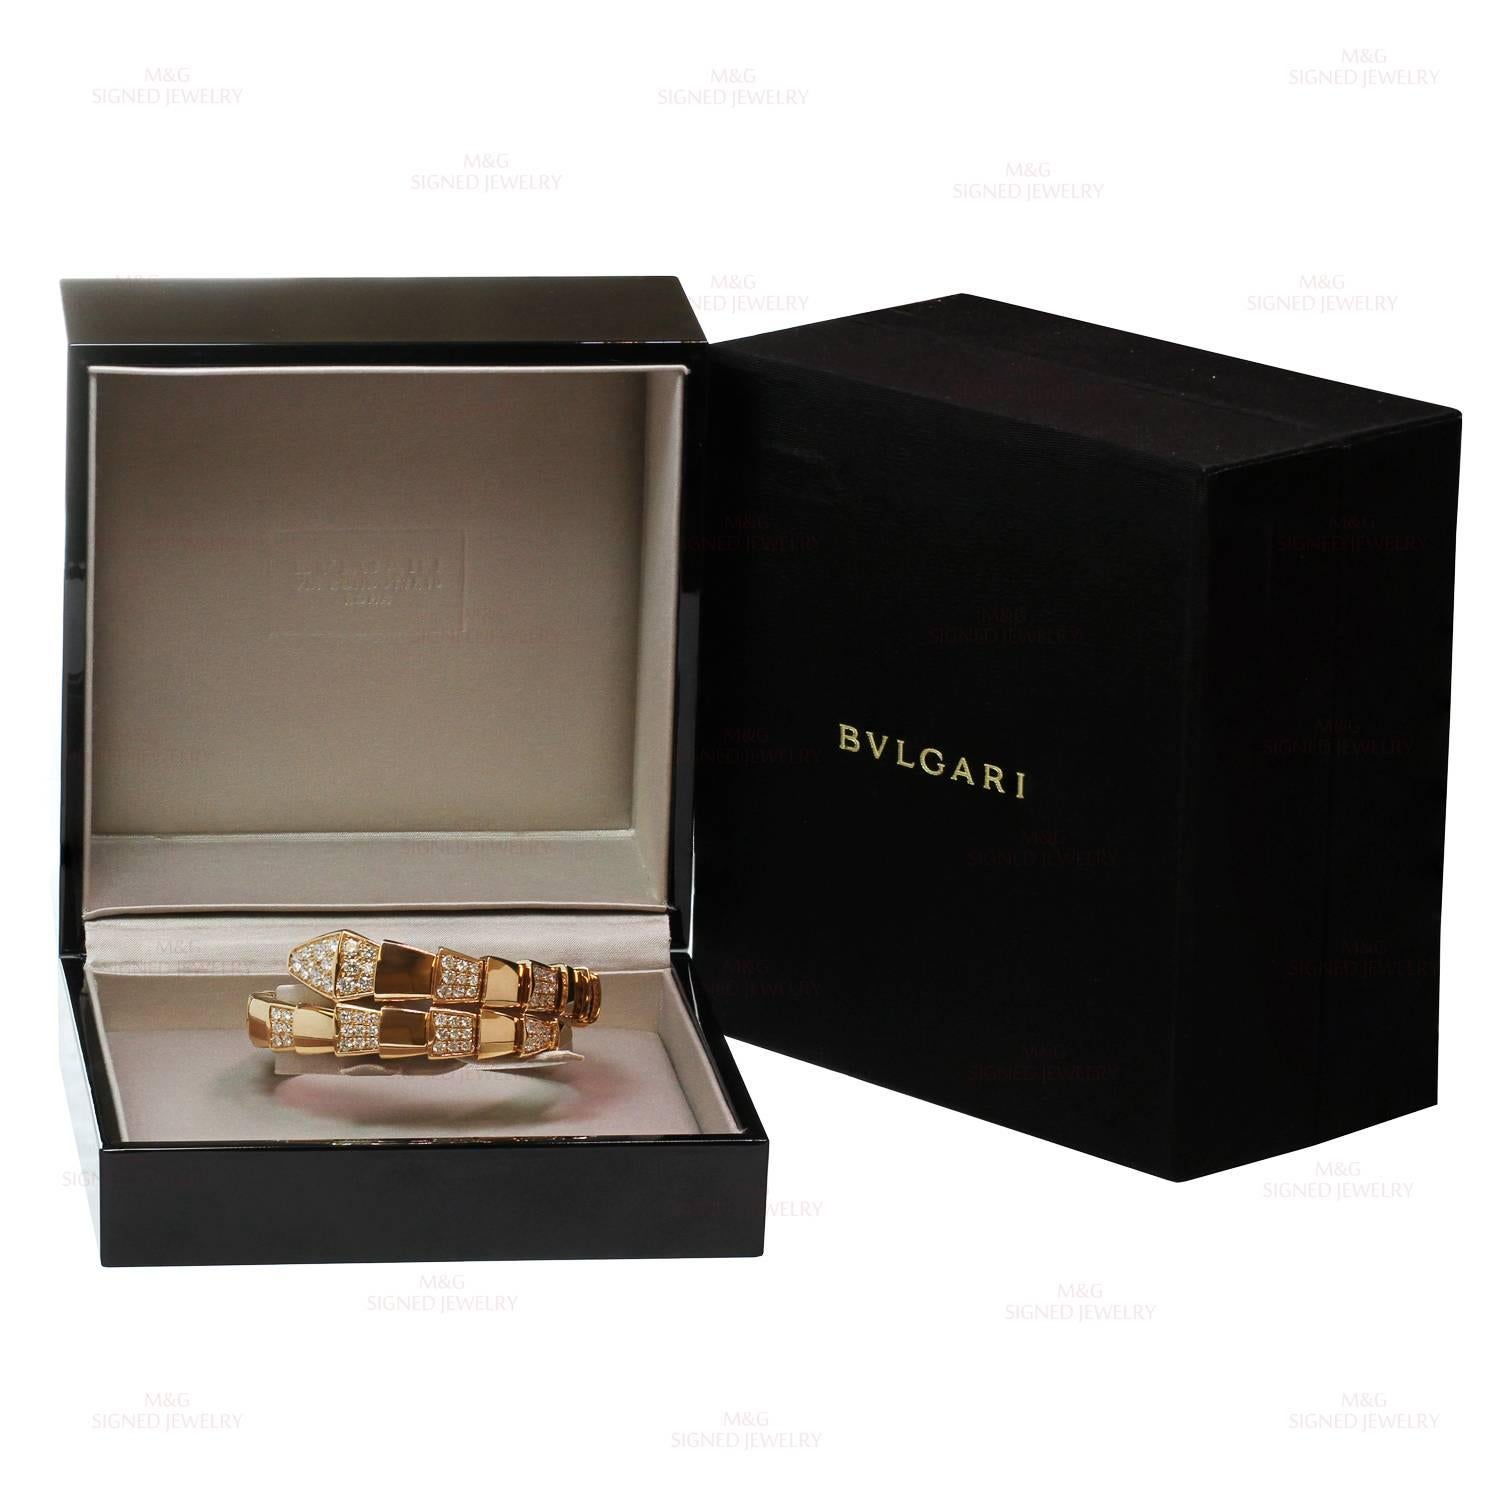 This fabulous Bulgari bracelet from the classic Serpenti collection is crafted in 18k rose gold and pave-set with brilliant-cut round diamonds of an estimated 5.50 carats. This flexible bracelet will comfortably fit a wrist of up to 7 inches in